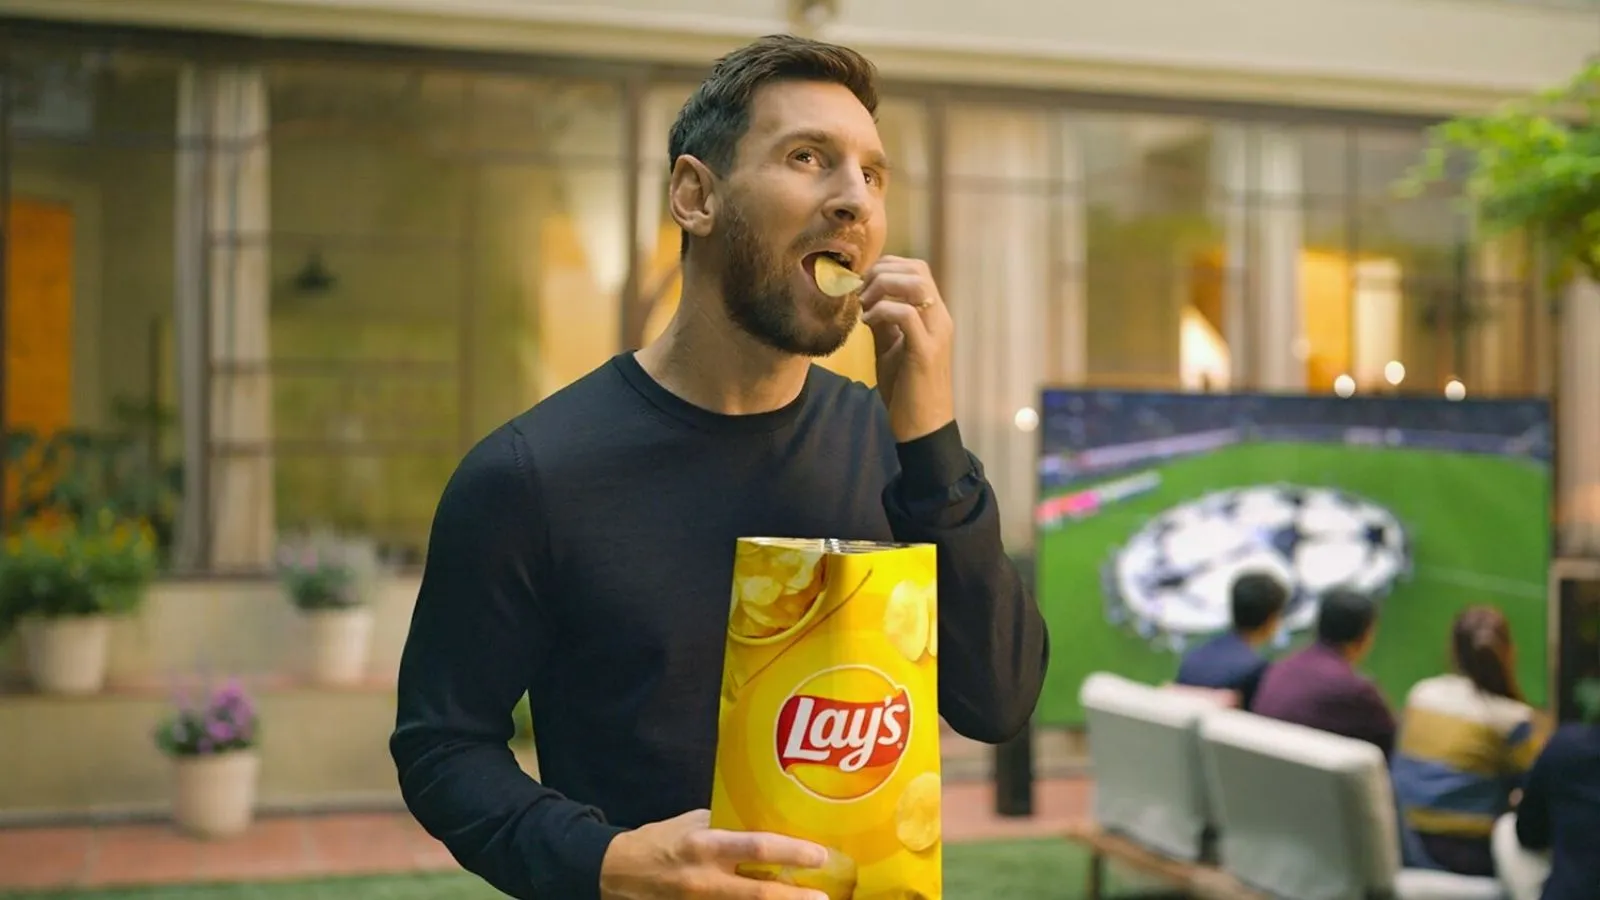 lionel-messi-and-lay's-collaboration